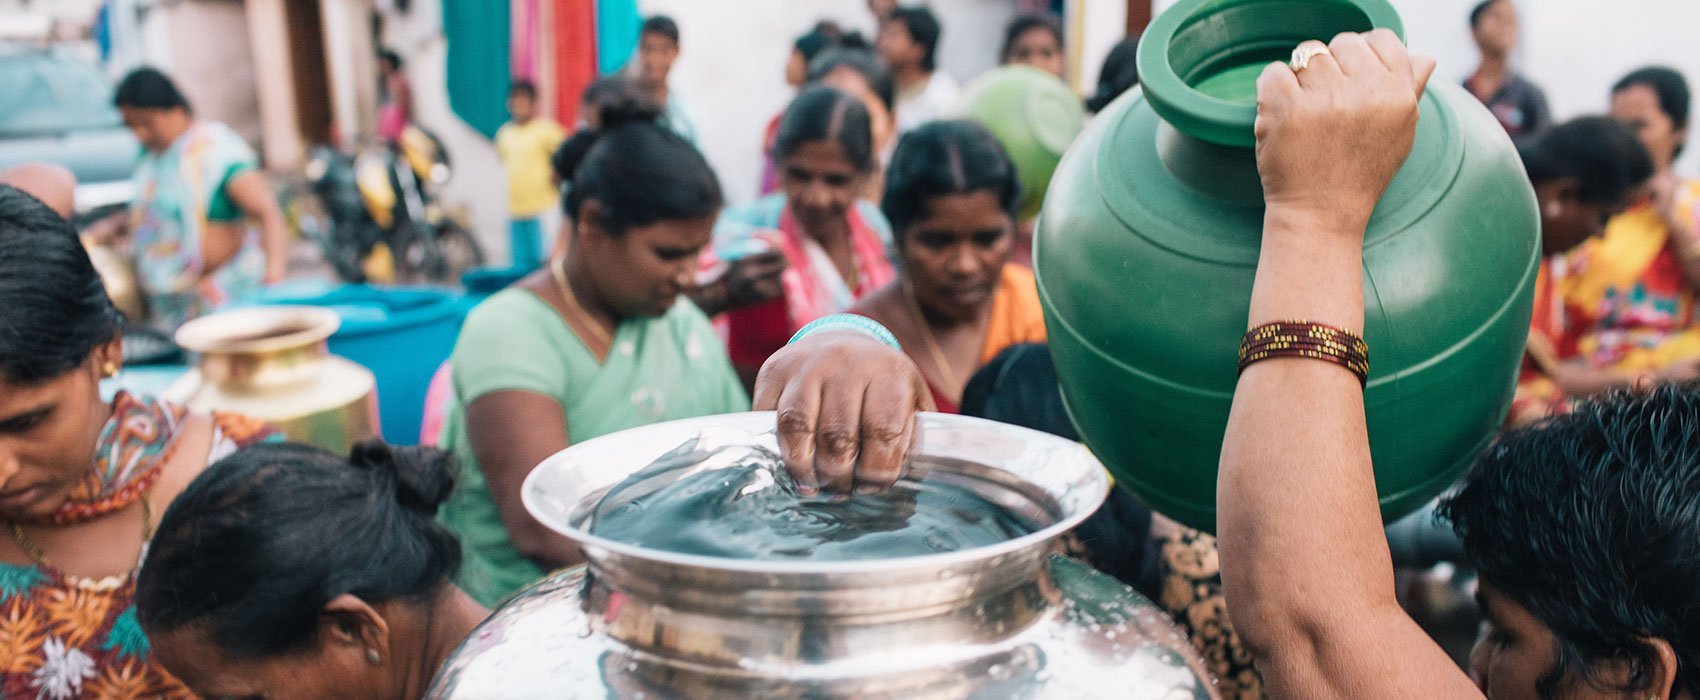 Water Crisis - Learn About The Global Water Crisis | Water.org